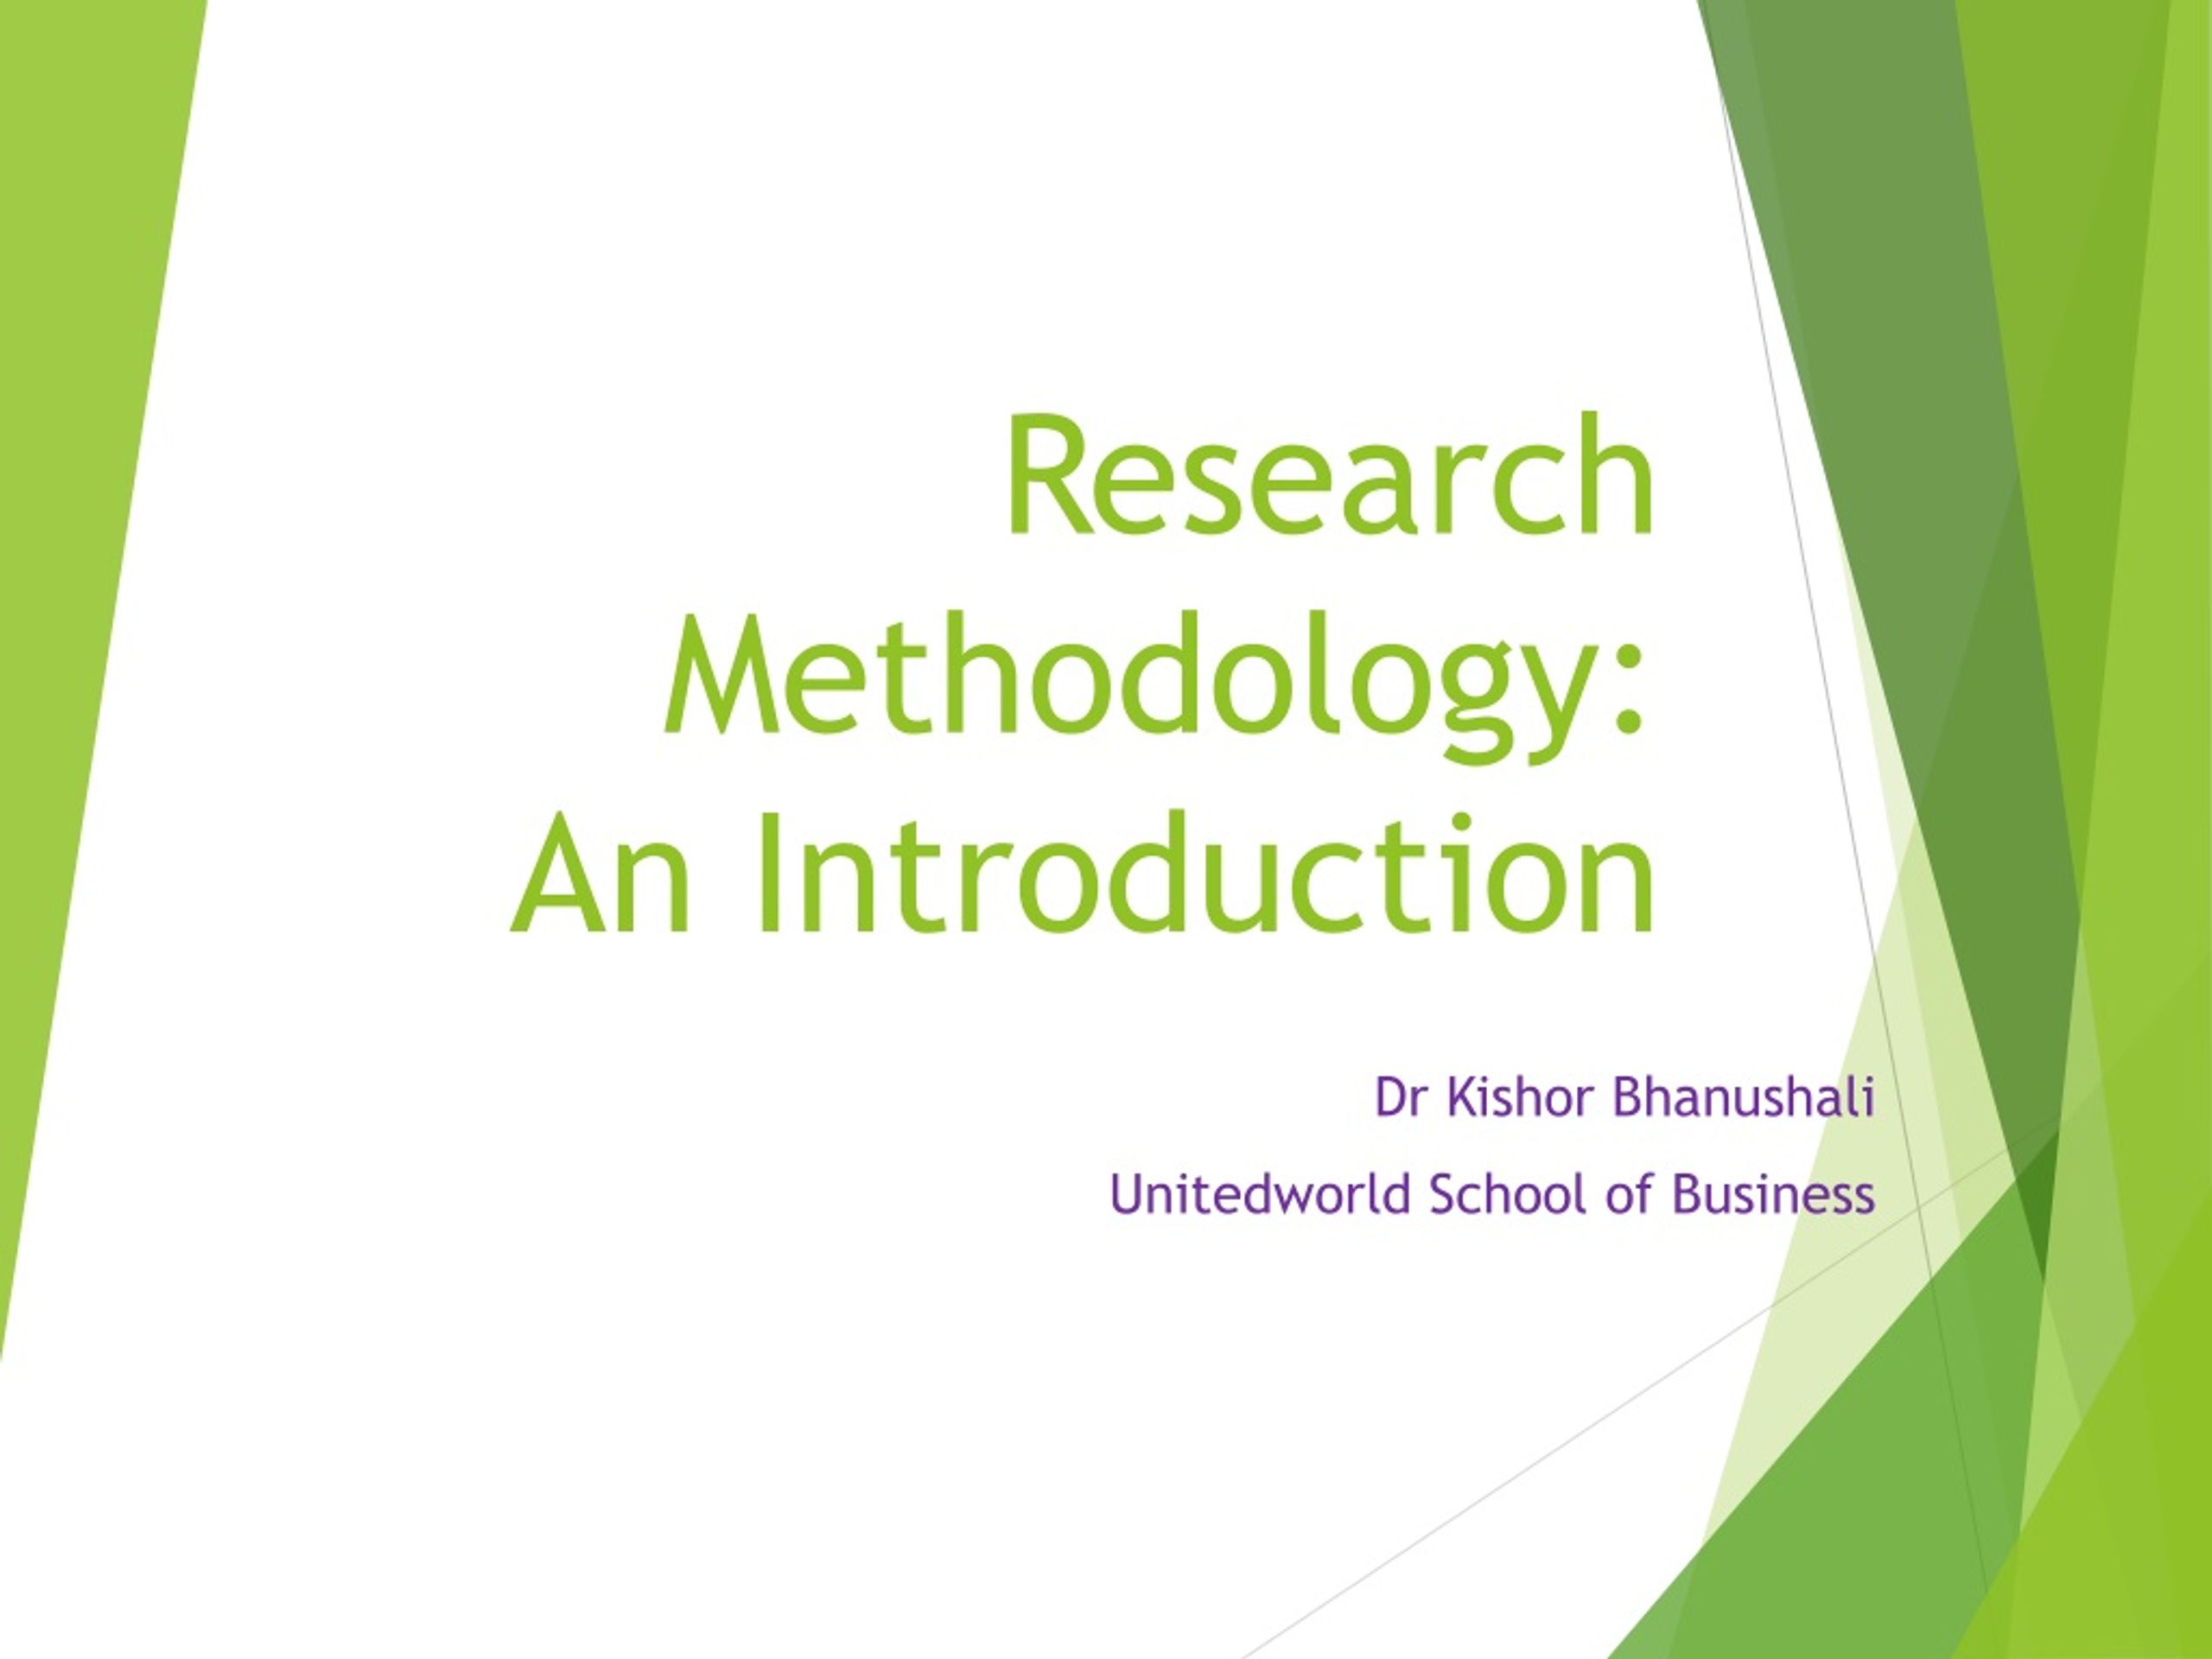 ppt on introduction to research methodology